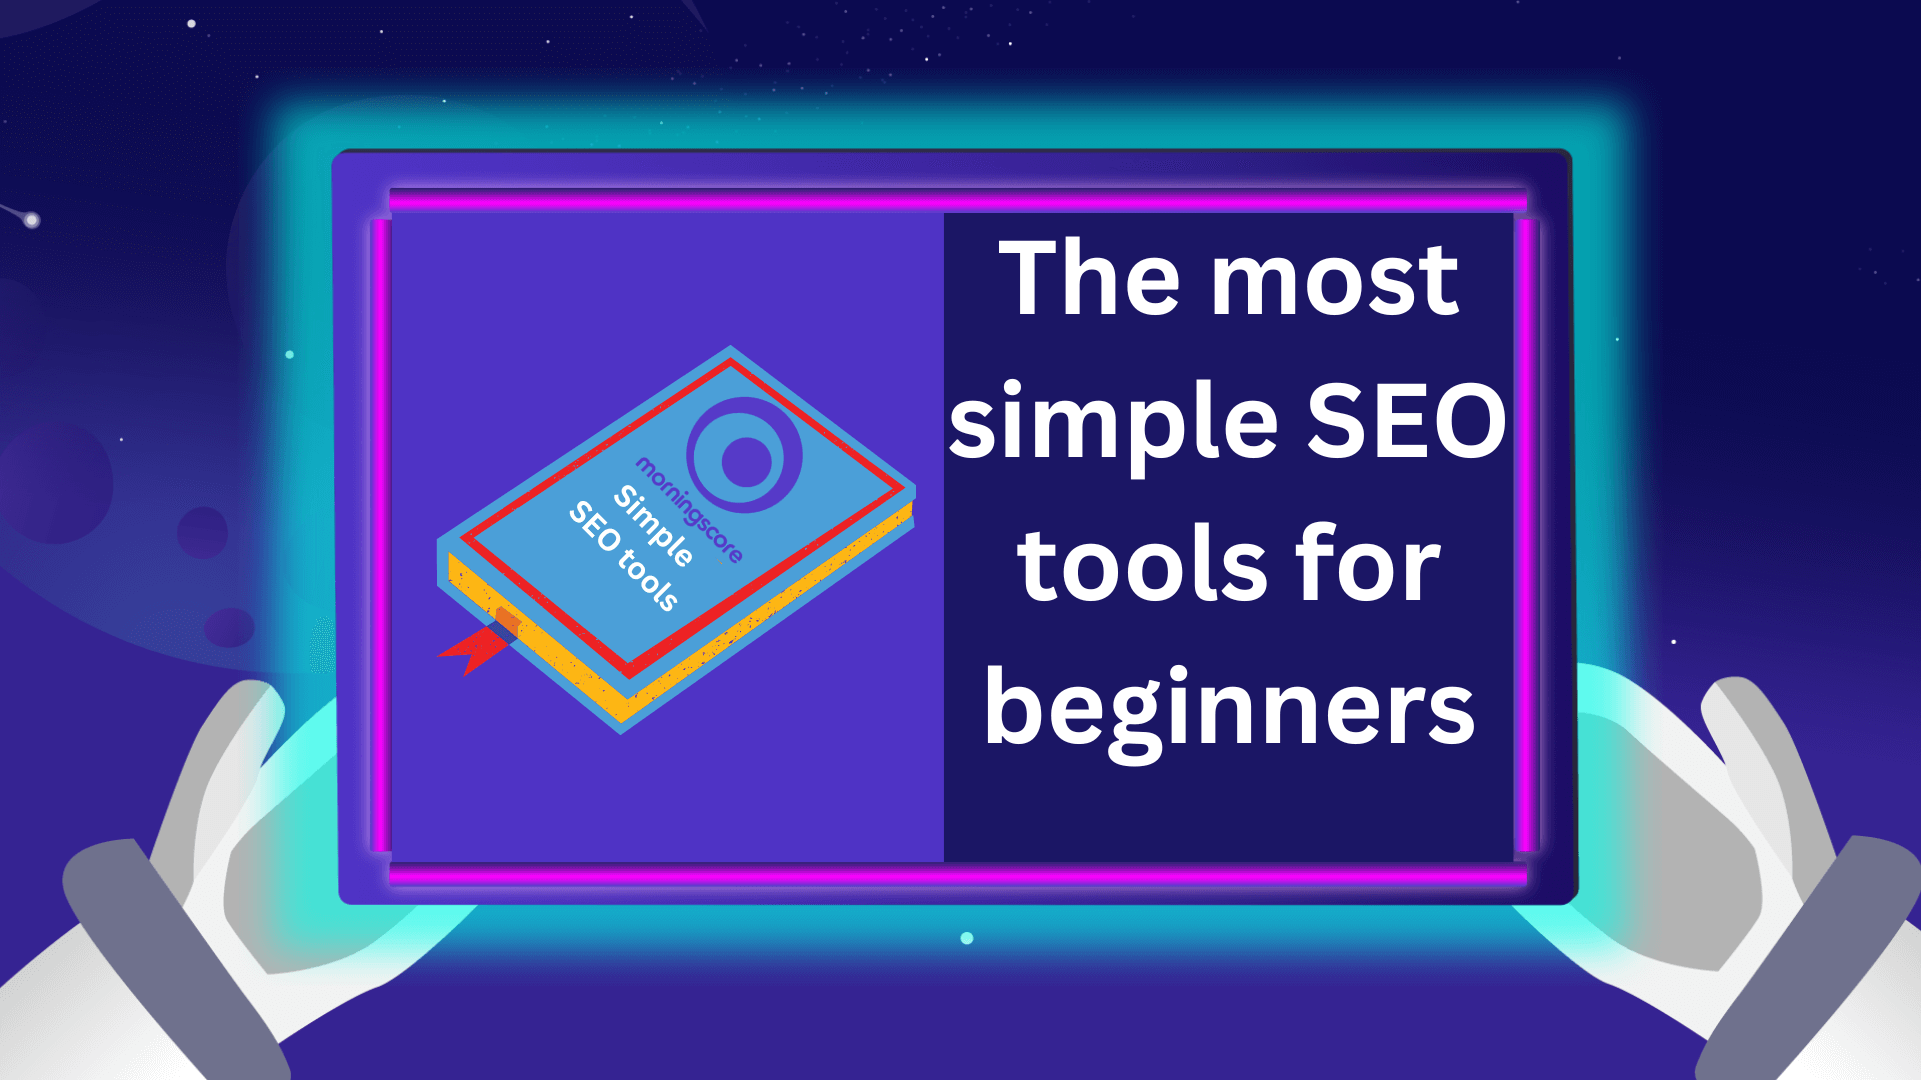 The most simple and easy SEO tools for beginners